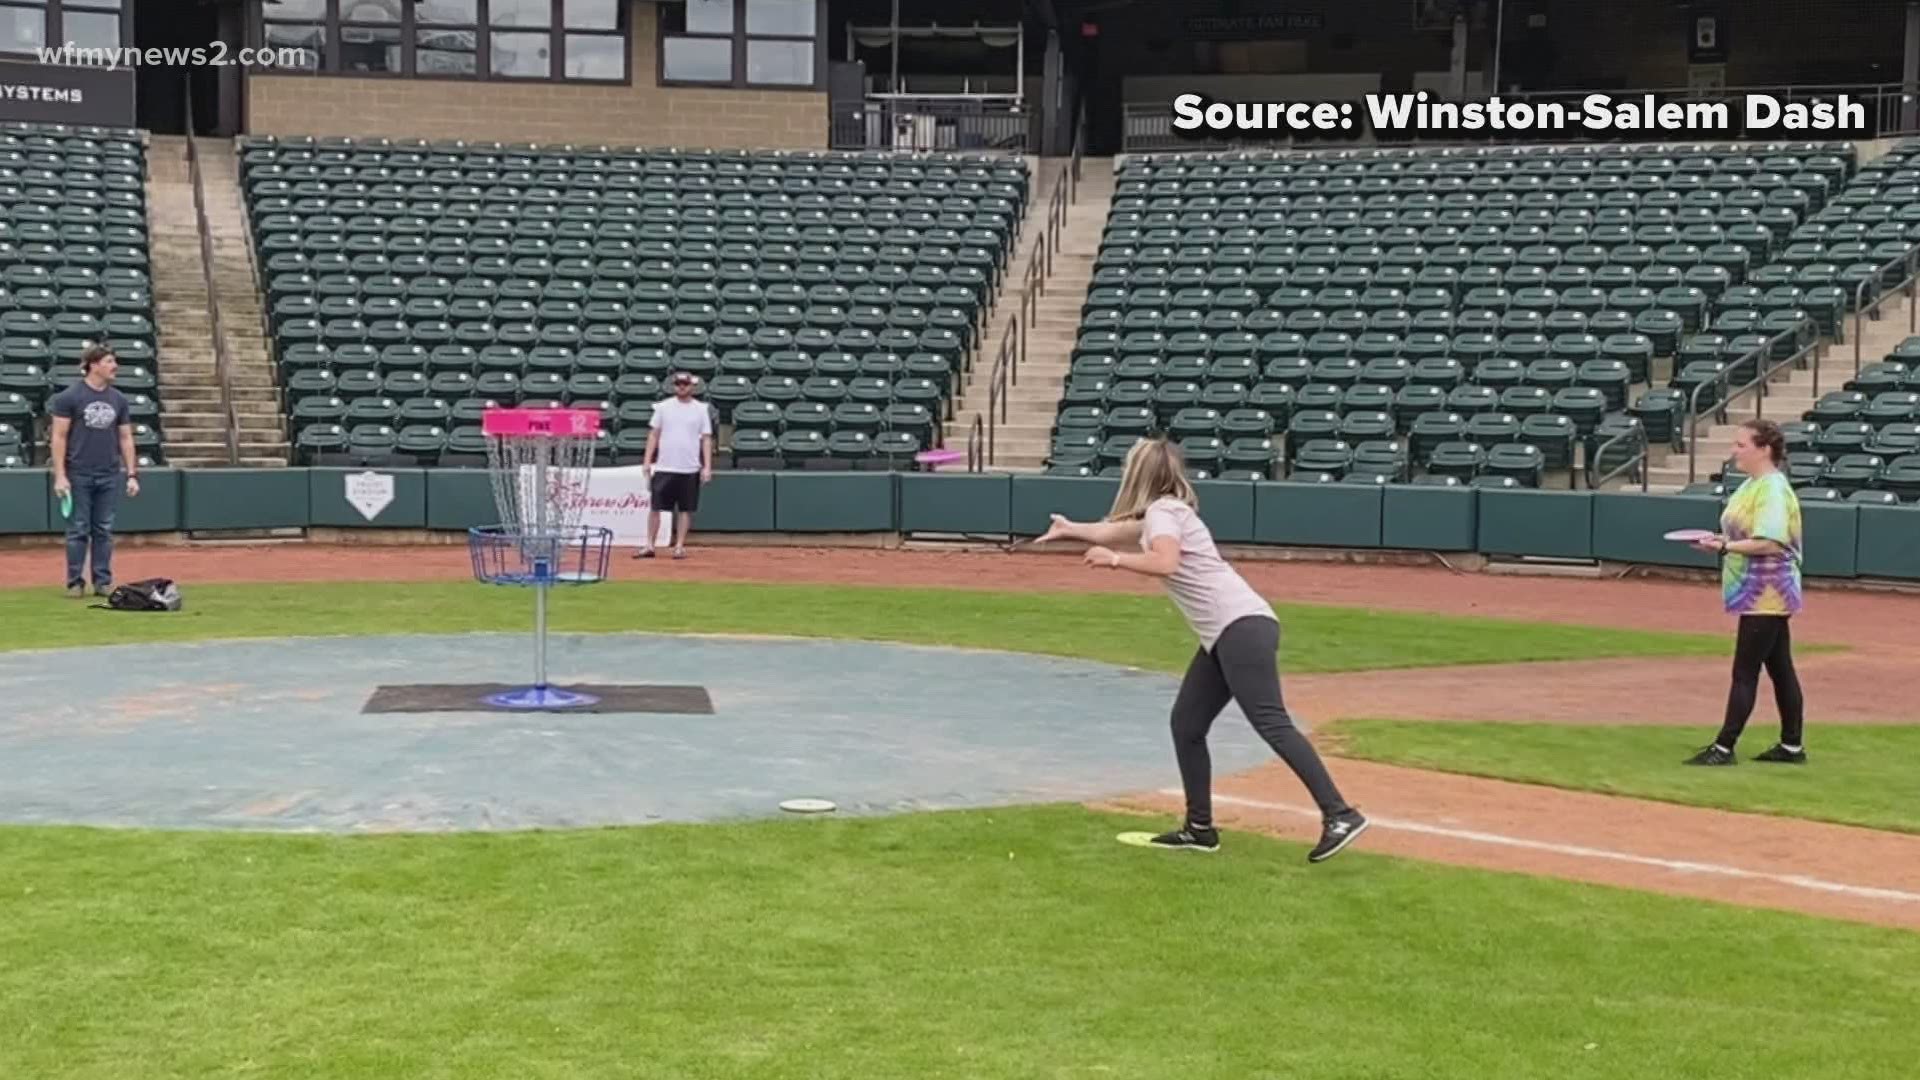 The Winston-Salem Dash are searching for new ways to keep us entertained safely. Their next venture? Why, frisbee golf in the stadium, of course.